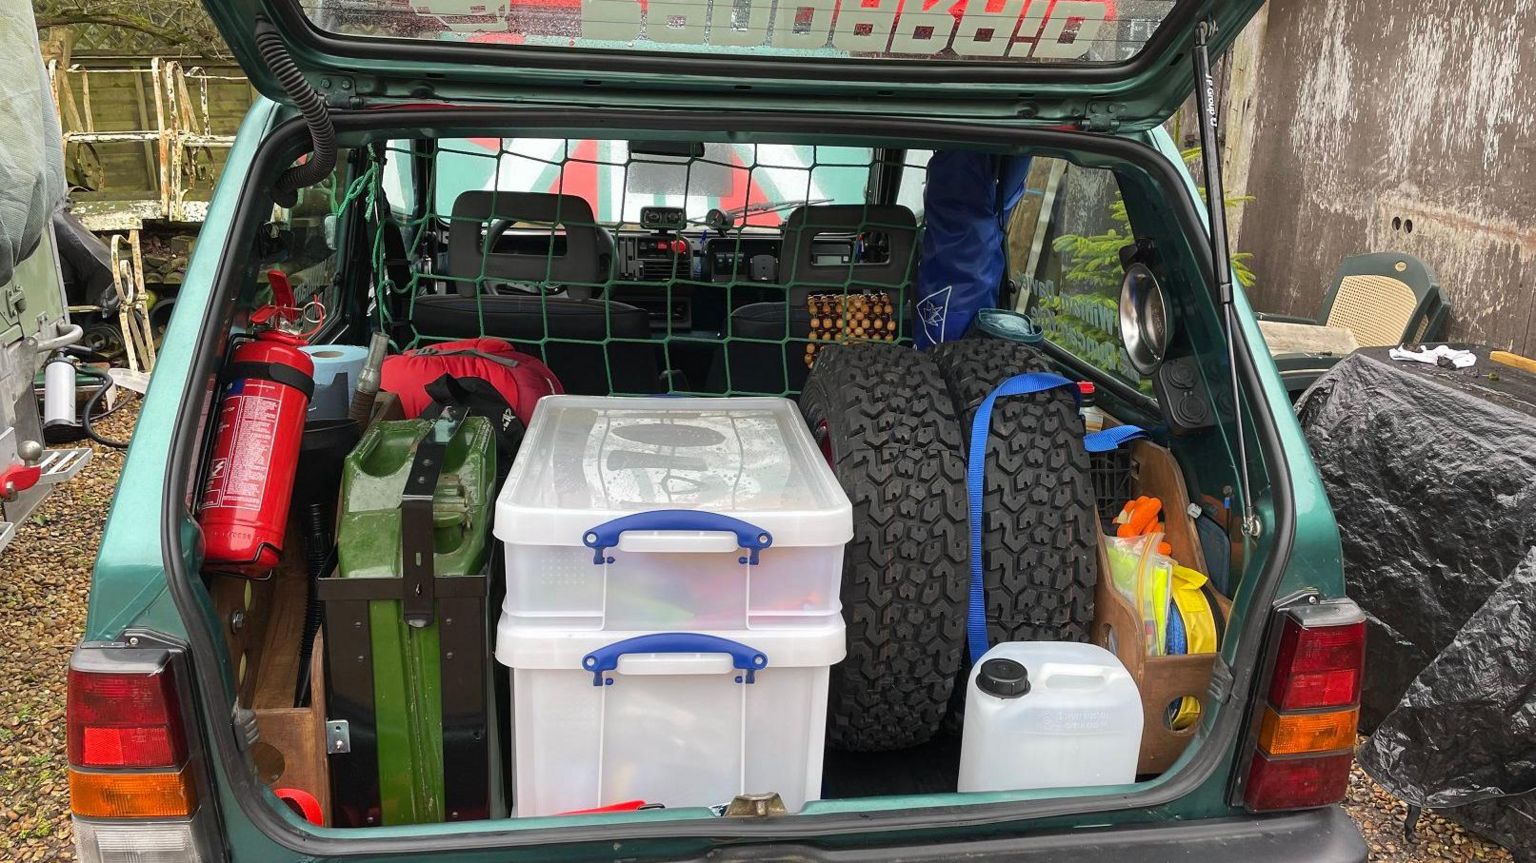 The boot of the Fiat Panda, with equipment inside